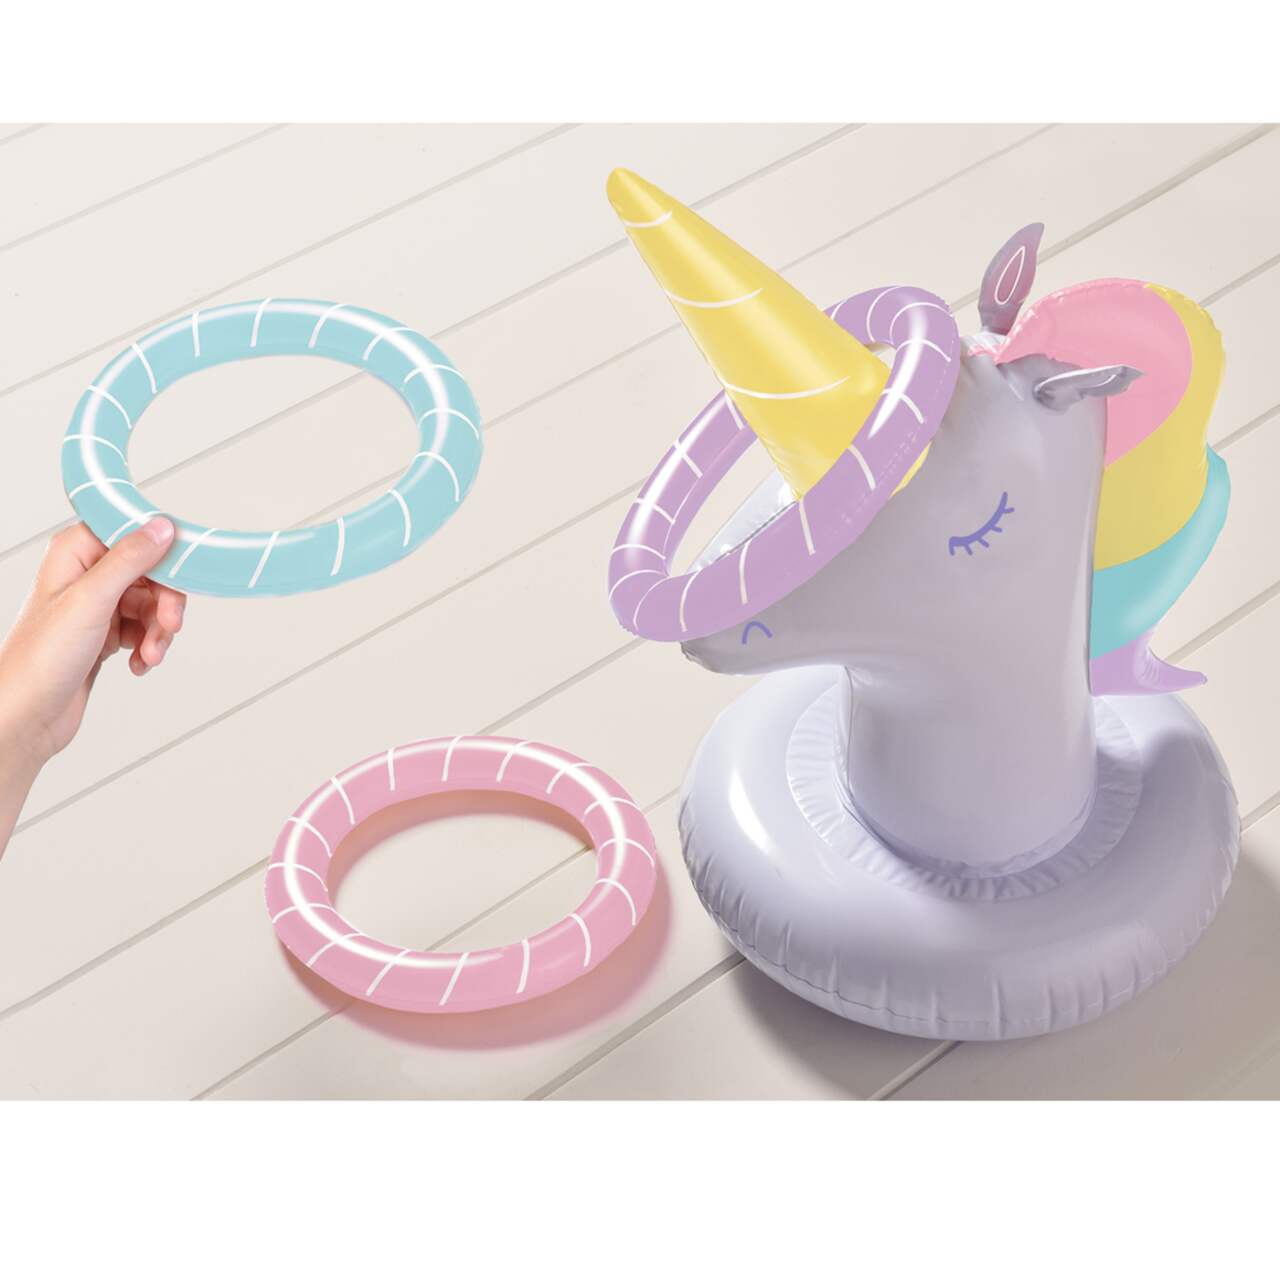 https://media-www.canadiantire.ca/product/seasonal-gardening/party-city-everyday/party-city-party-supplies-decor/8535309/enchanted-unicorn-inflatable-ring-toss-game-2e4366de-a7b6-429d-8ec4-7983d3a2541a.png?imdensity=1&imwidth=640&impolicy=mZoom